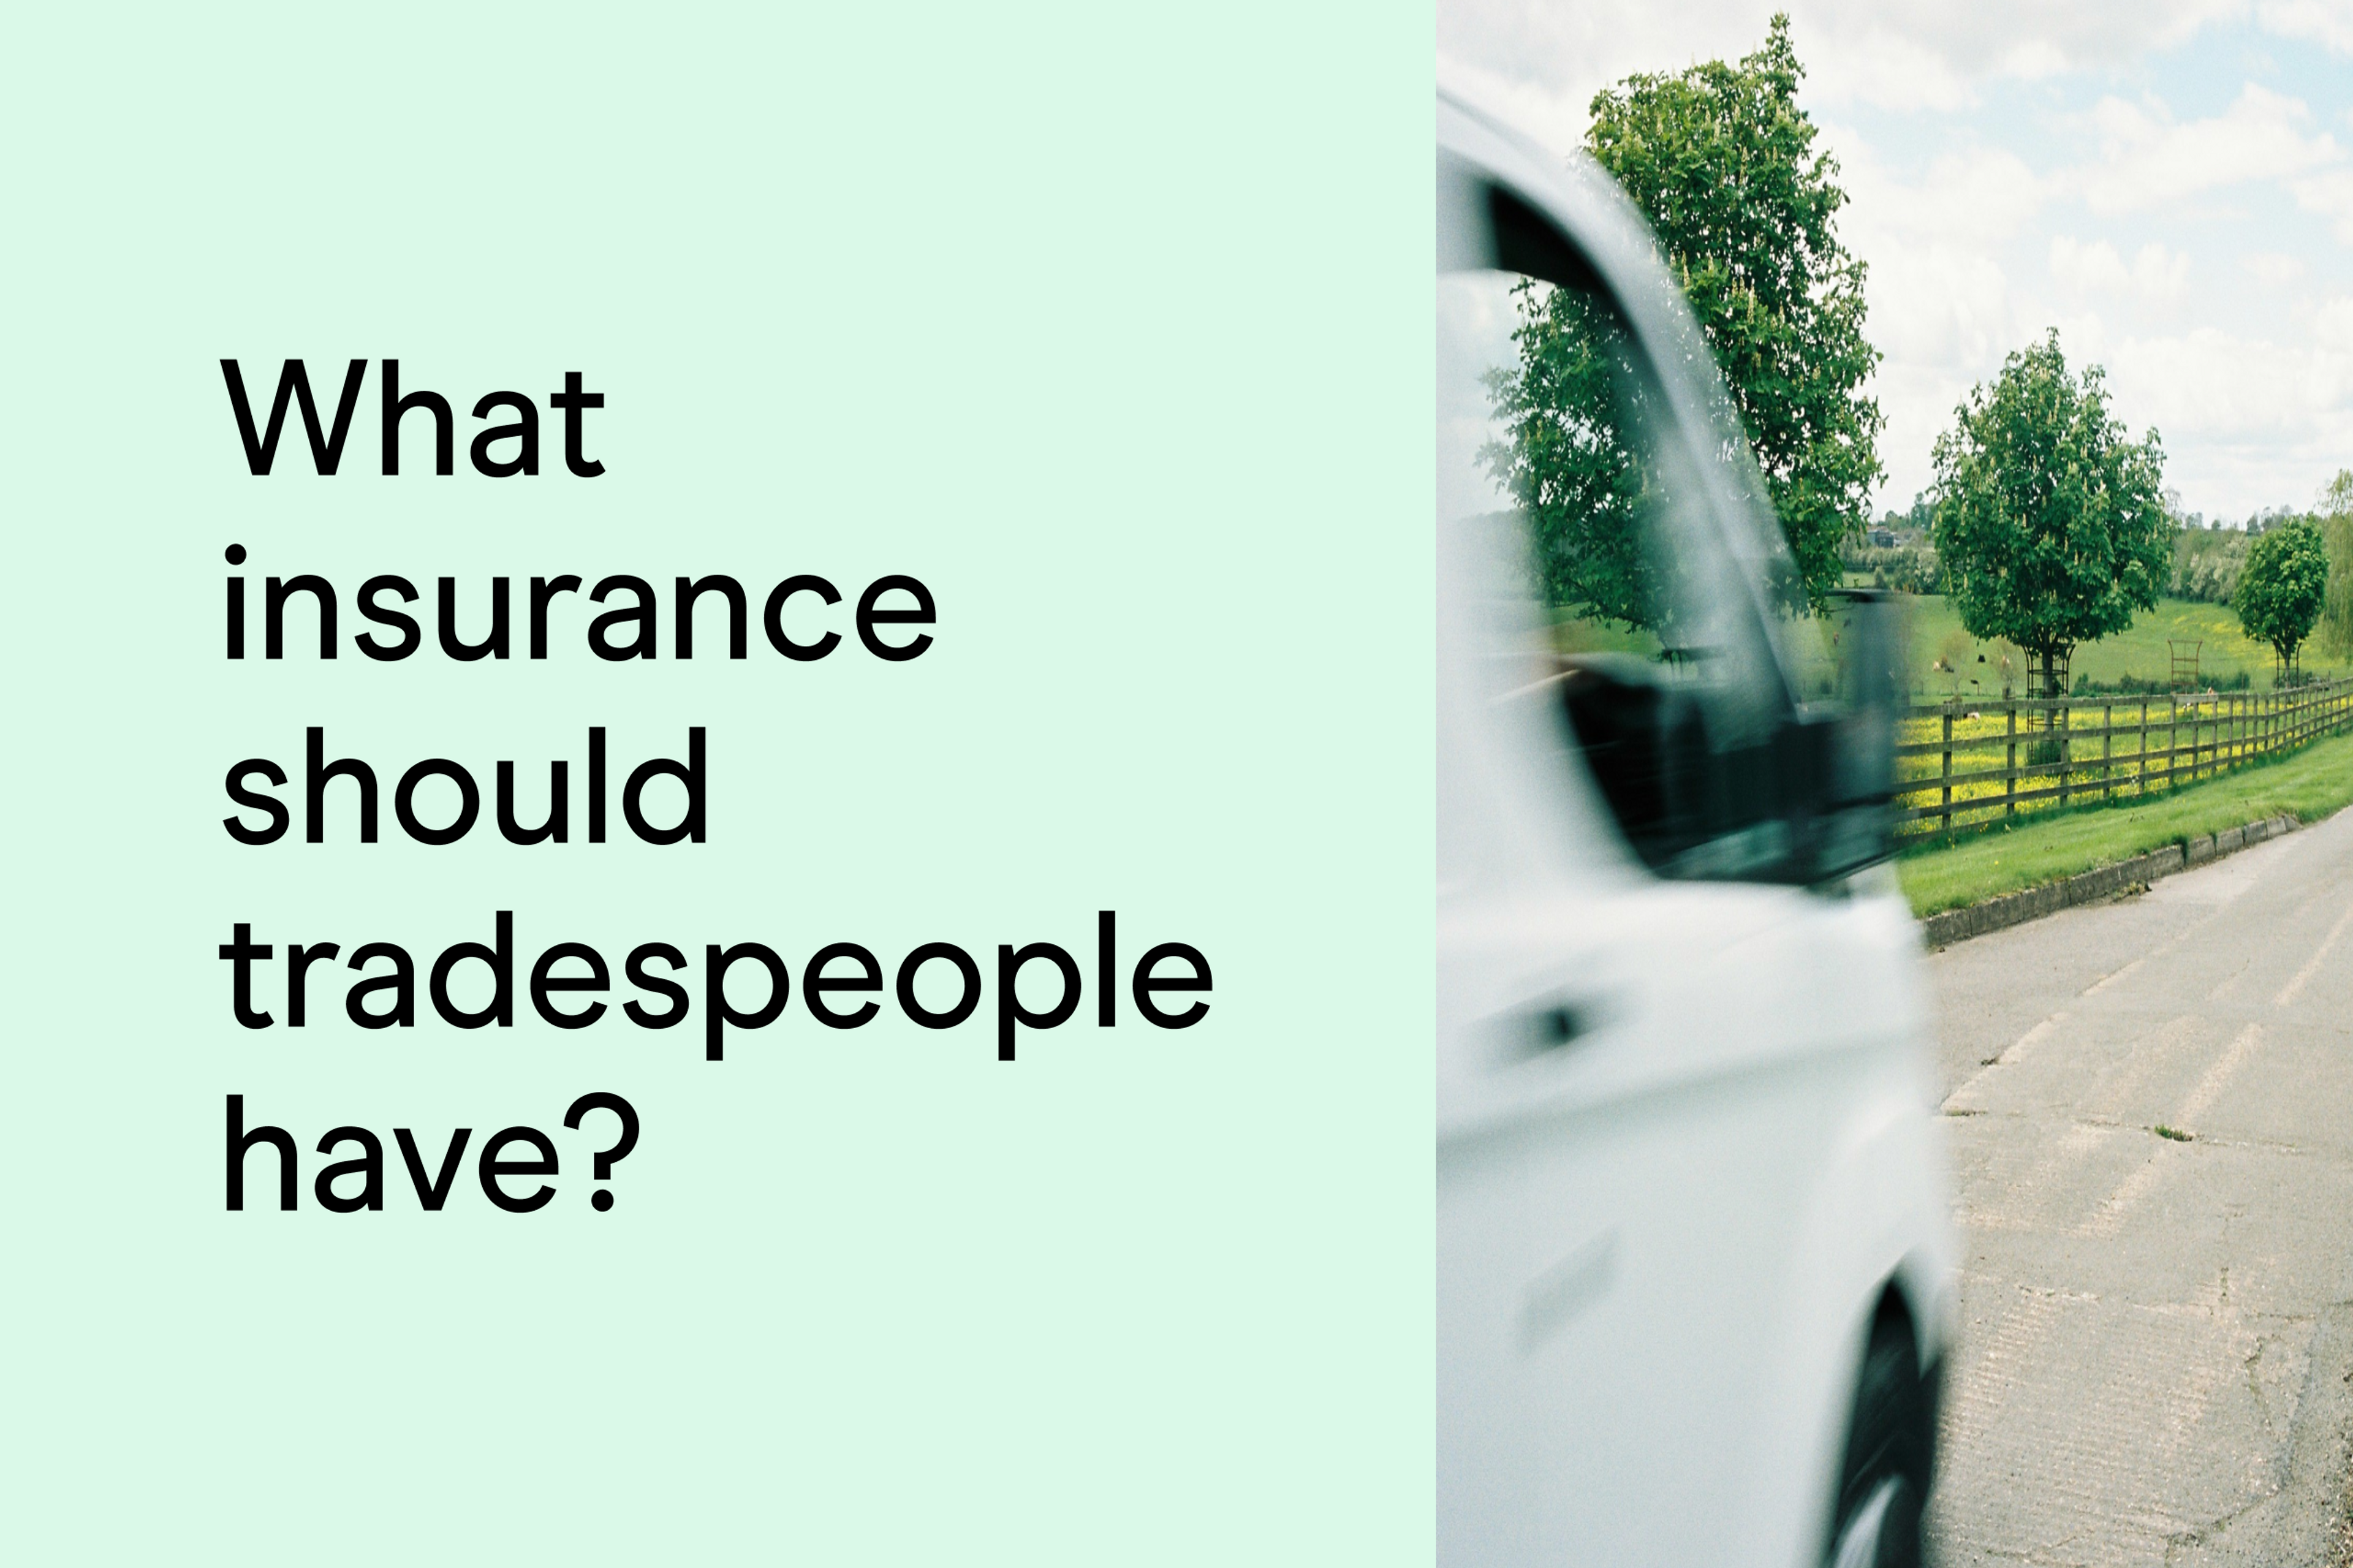 What insurance should tradespeople have?